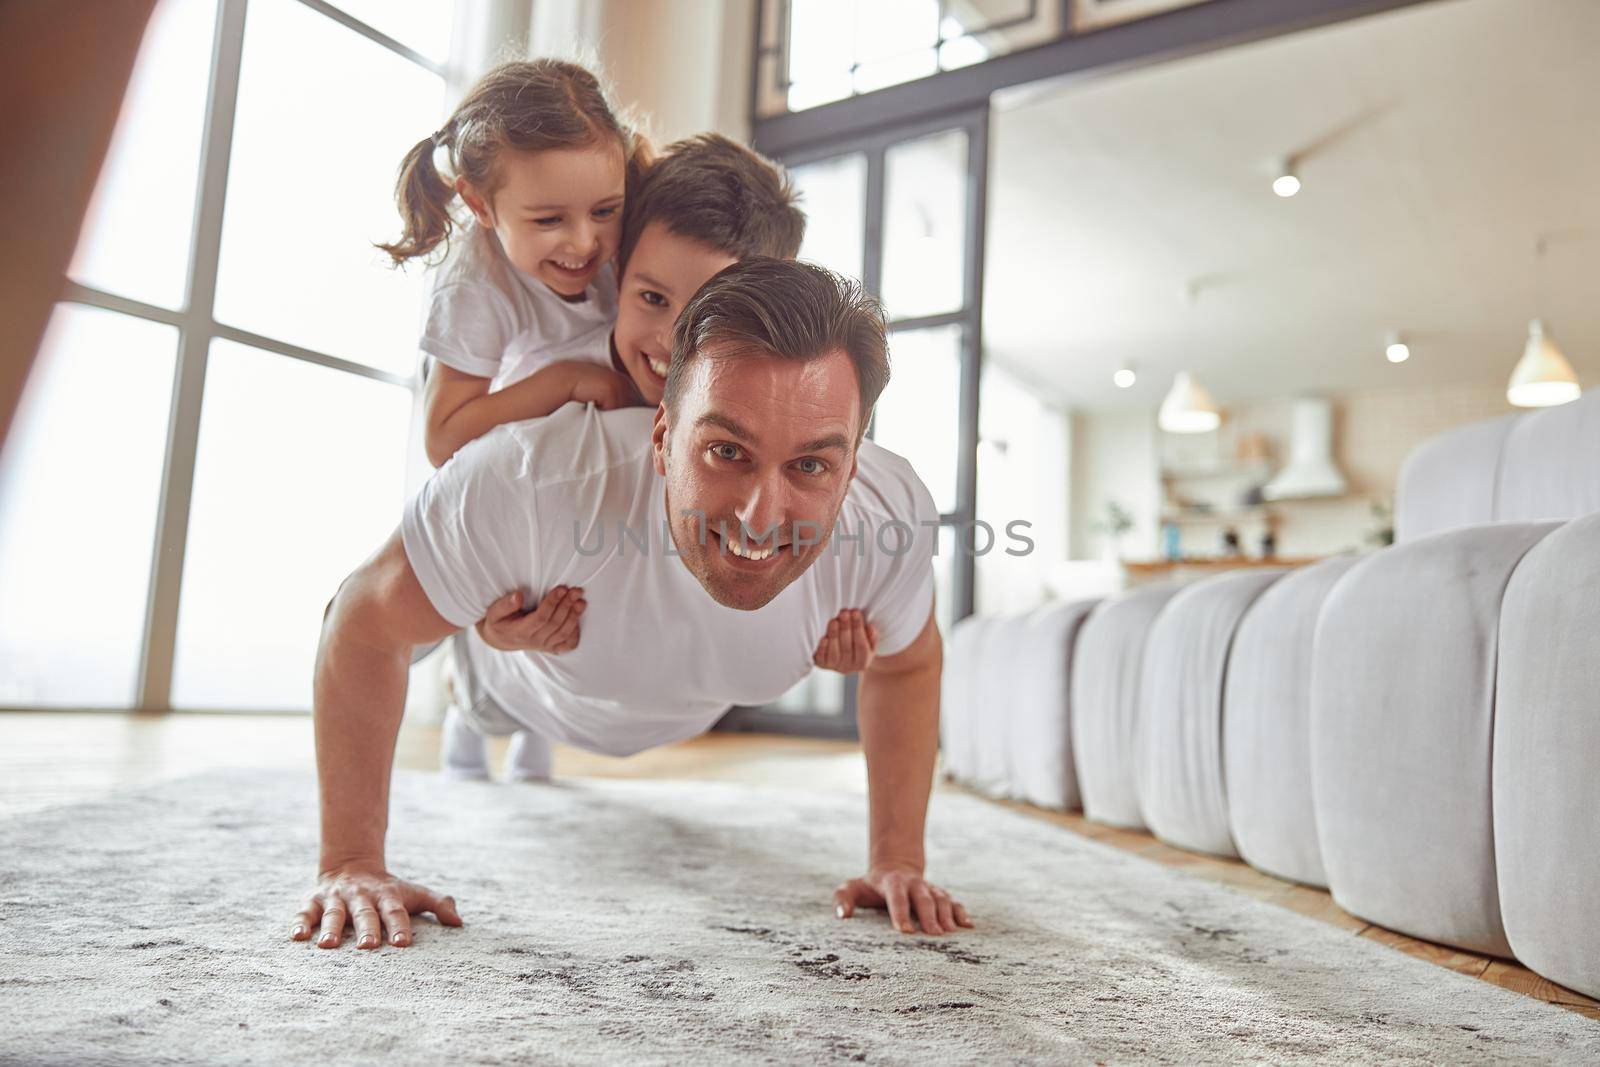 Portrait of smiling father exercising while holding daughter and son on his back during workout indoors